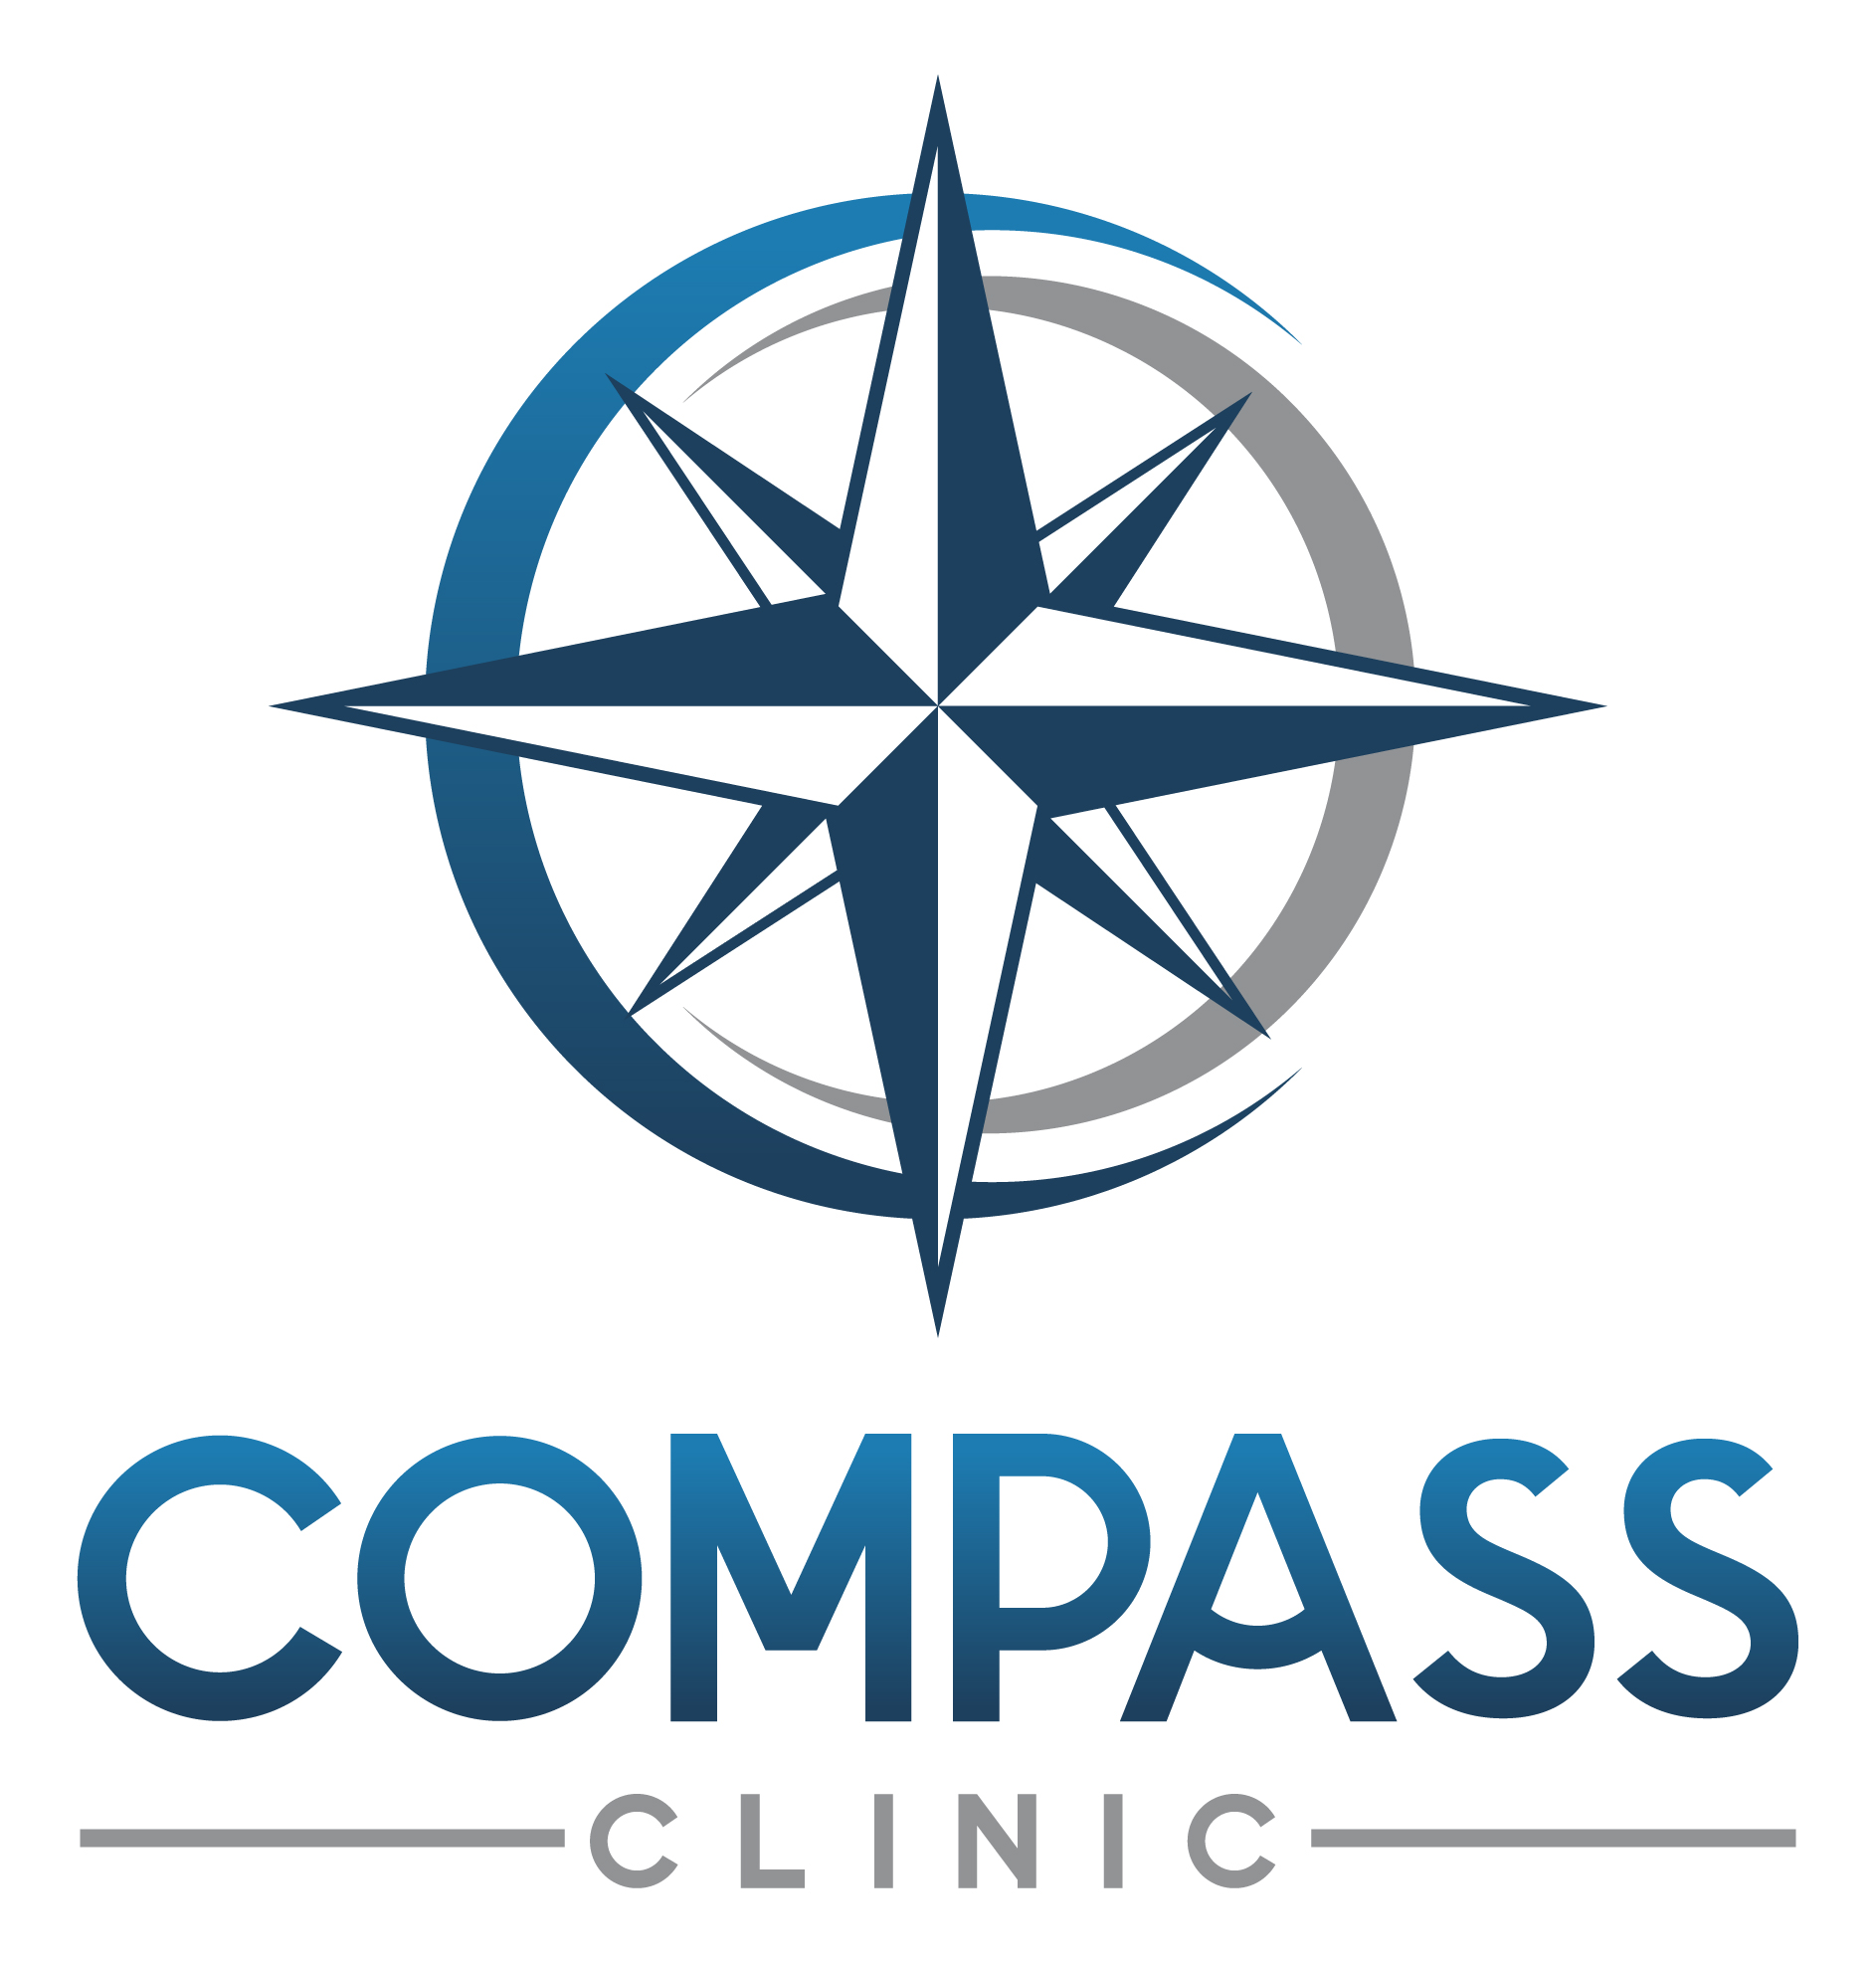 Compass Clinic of the Ozarks